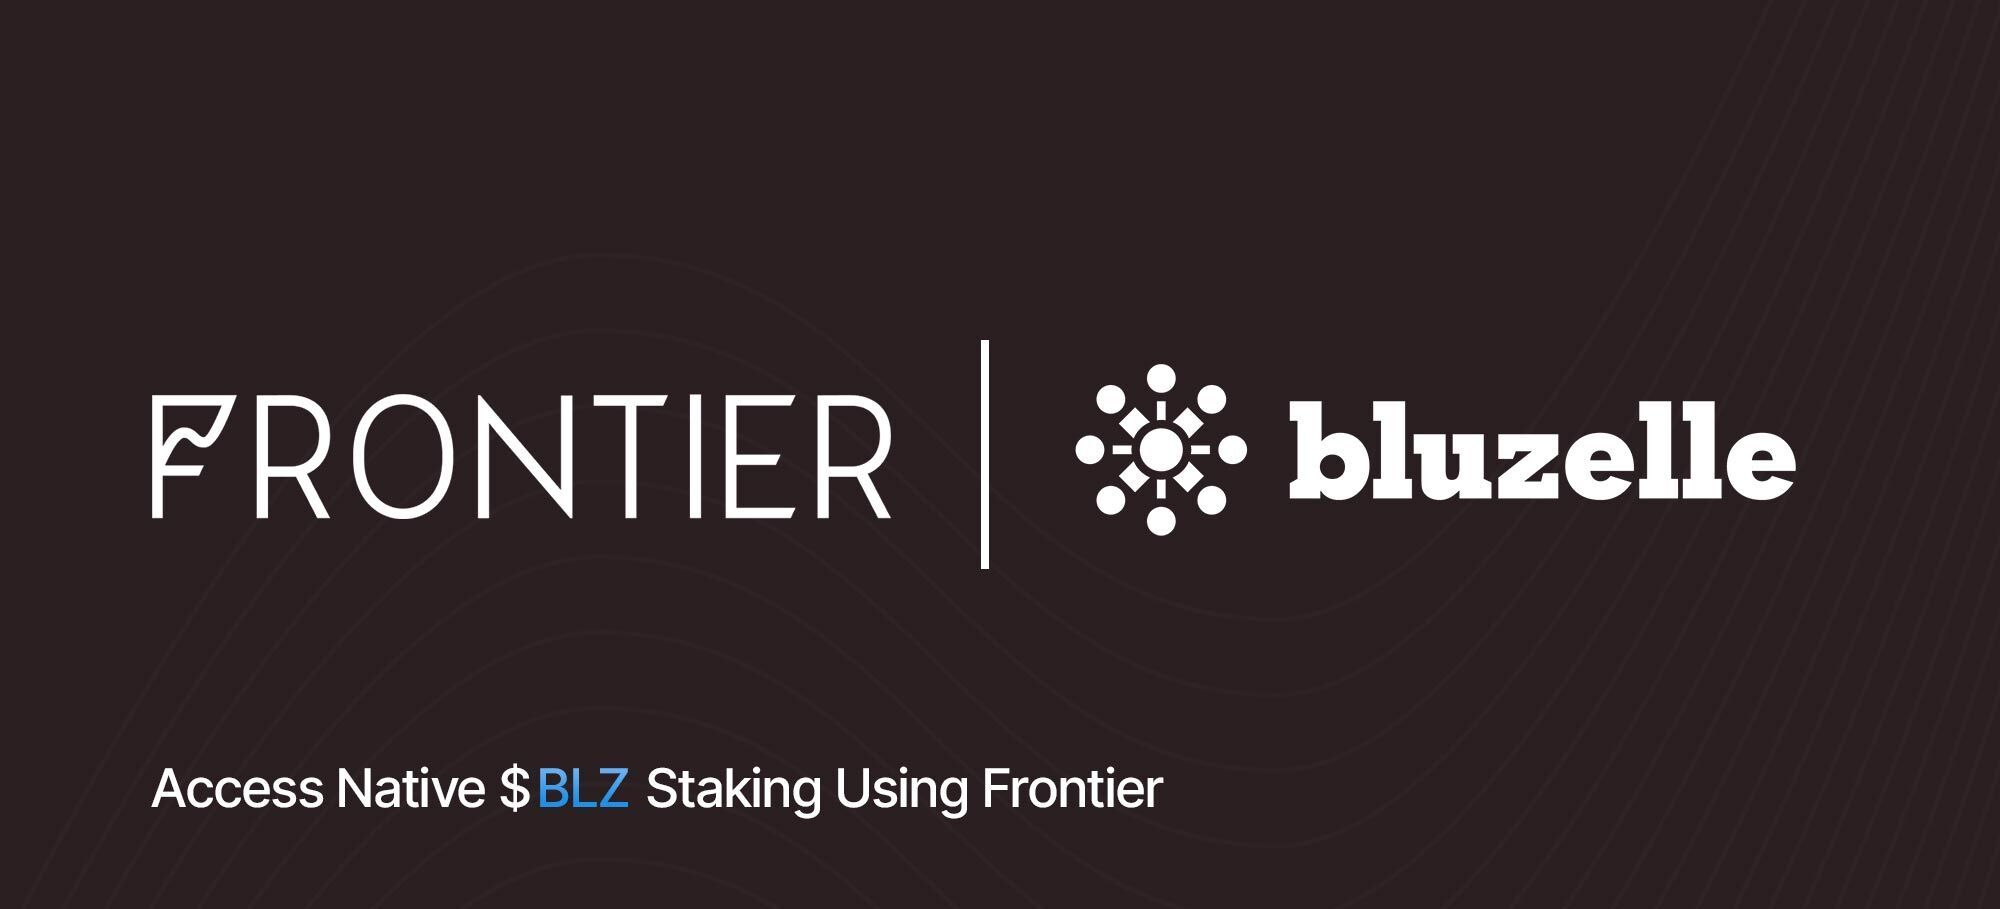 Frontier x Bluzelle = Native $BLZ Staking on Mobile📱